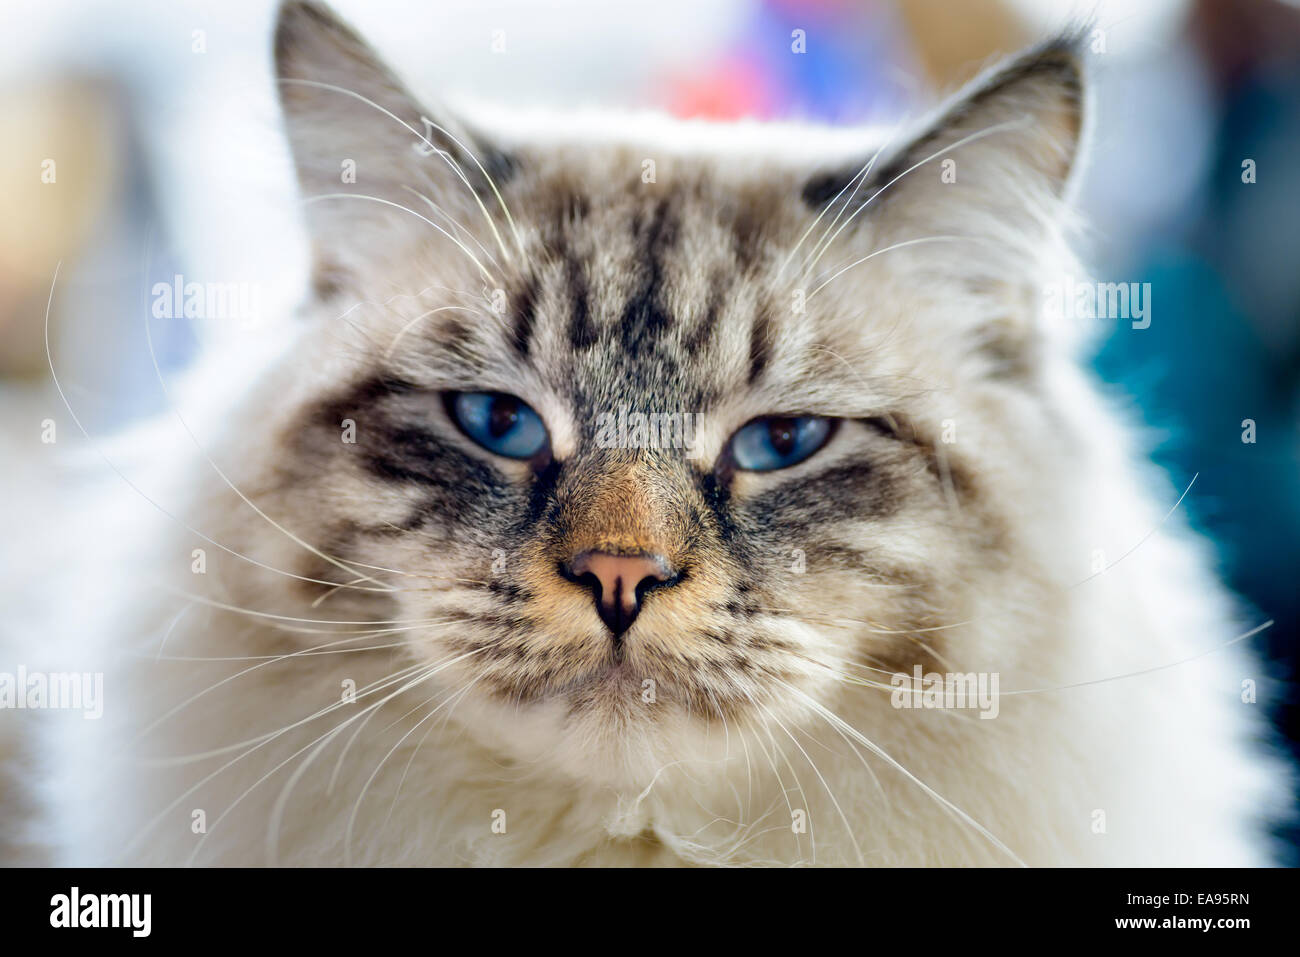 Animals: close-up portrait of blue-eyed Ragamuffin cat, looking at camera, blurred background Stock Photo